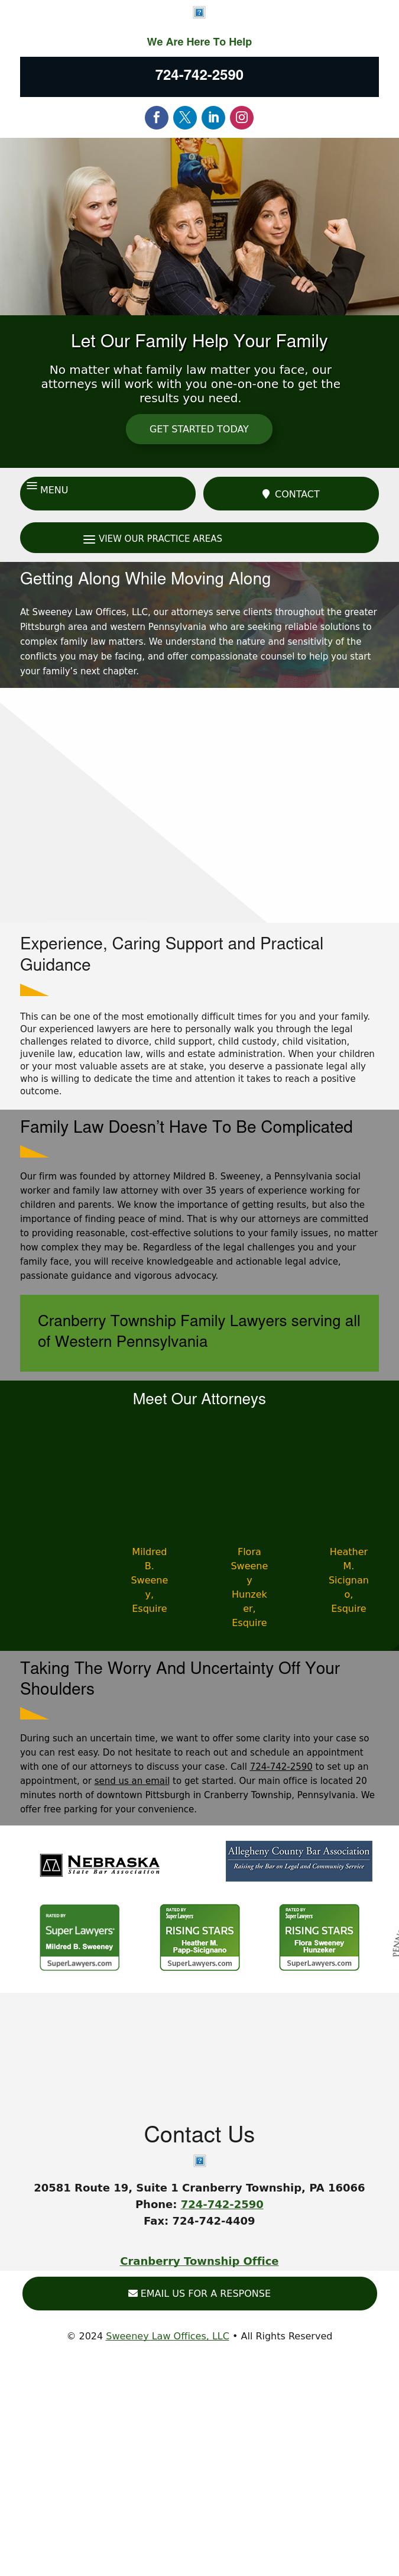 Sweeney Law Offices - Cranberry Township PA Lawyers